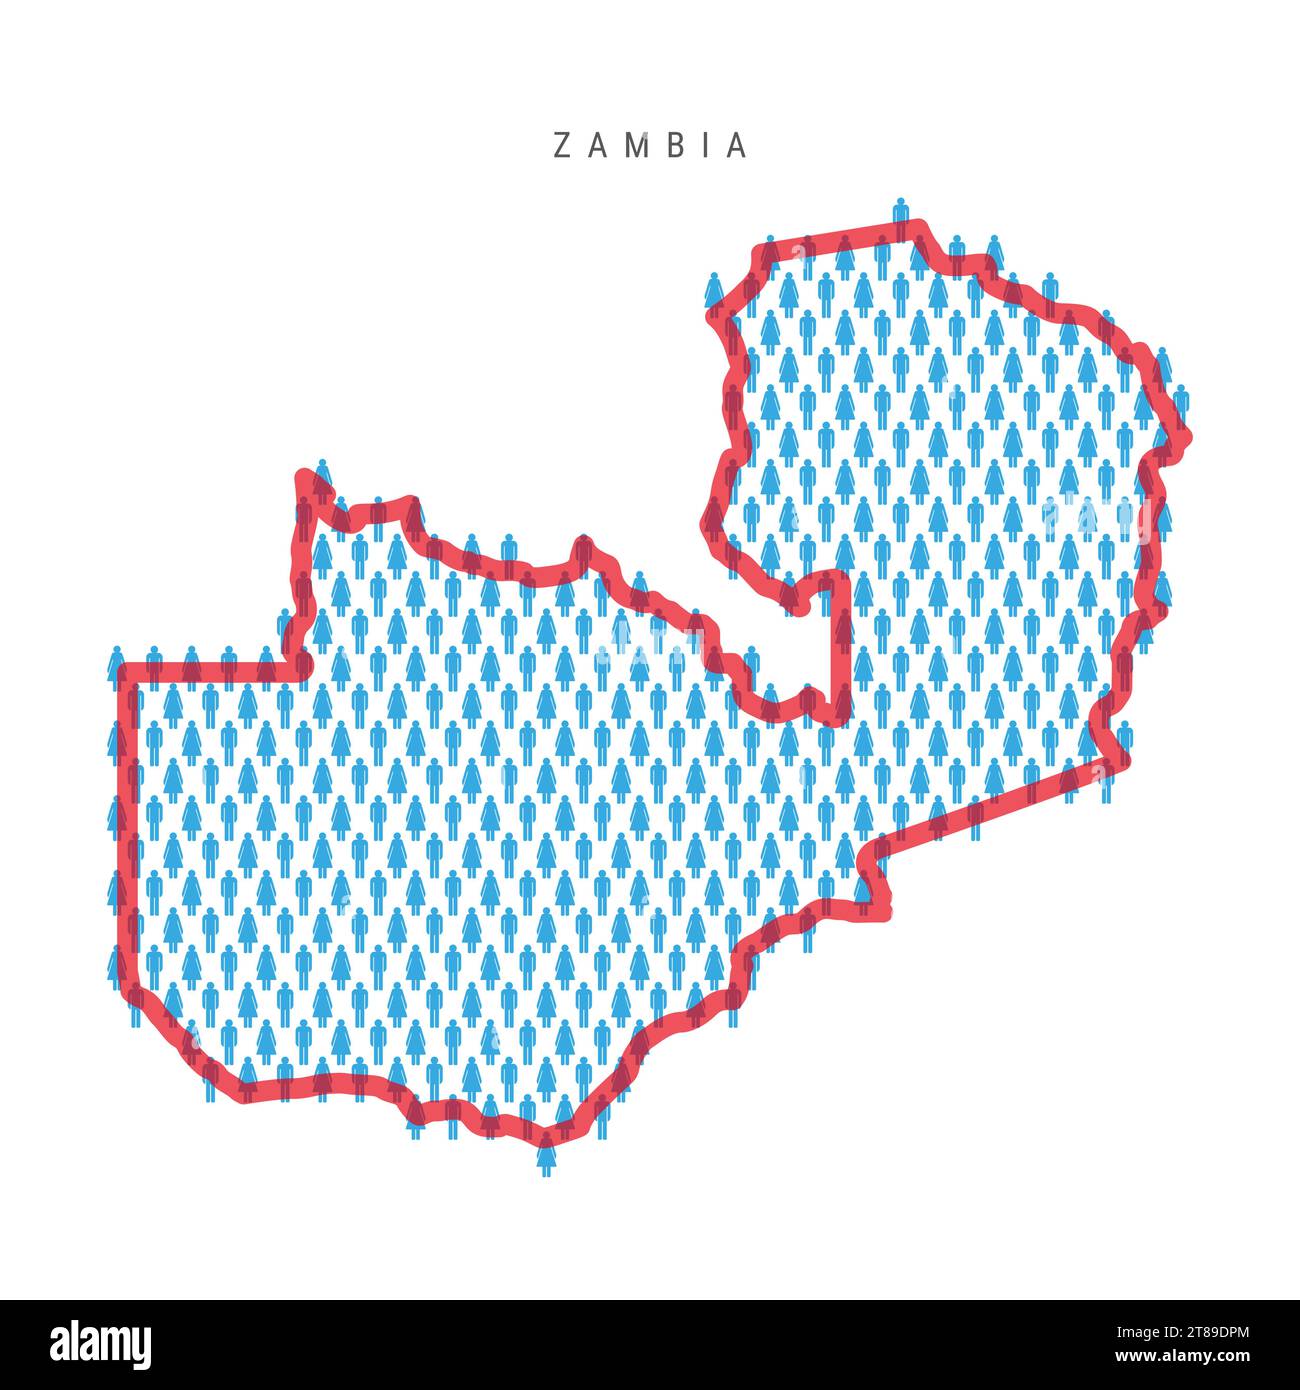 Zambia population map. Stick figures Zambian people map with bold red translucent country border. Pattern of men and women icons. Isolated vector illu Stock Vector